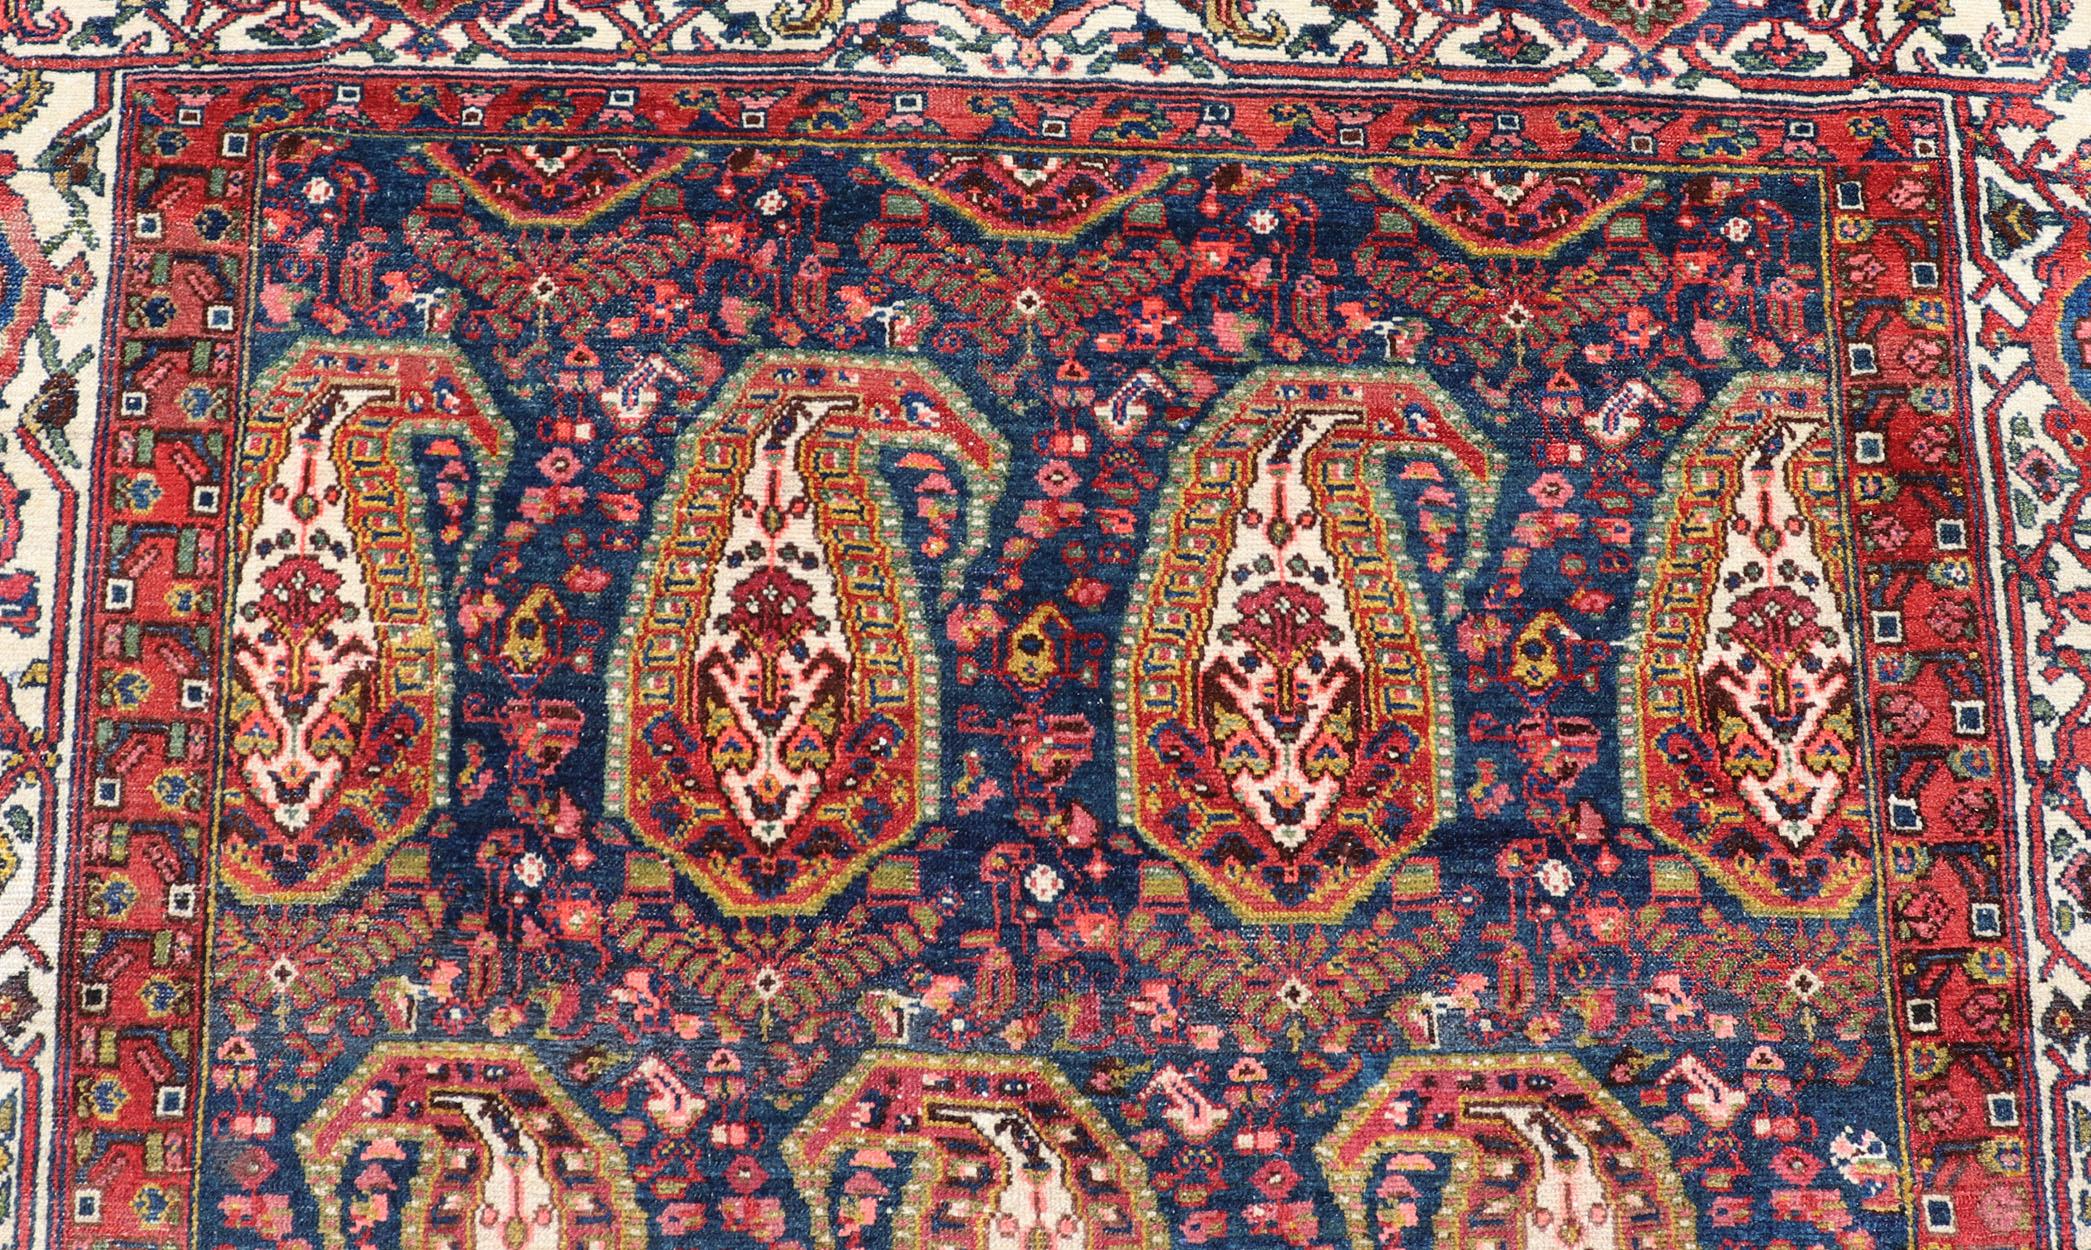 Antique Persian Paisley Field Hamadan in Multi-Tiered Border in Red and Blue For Sale 2